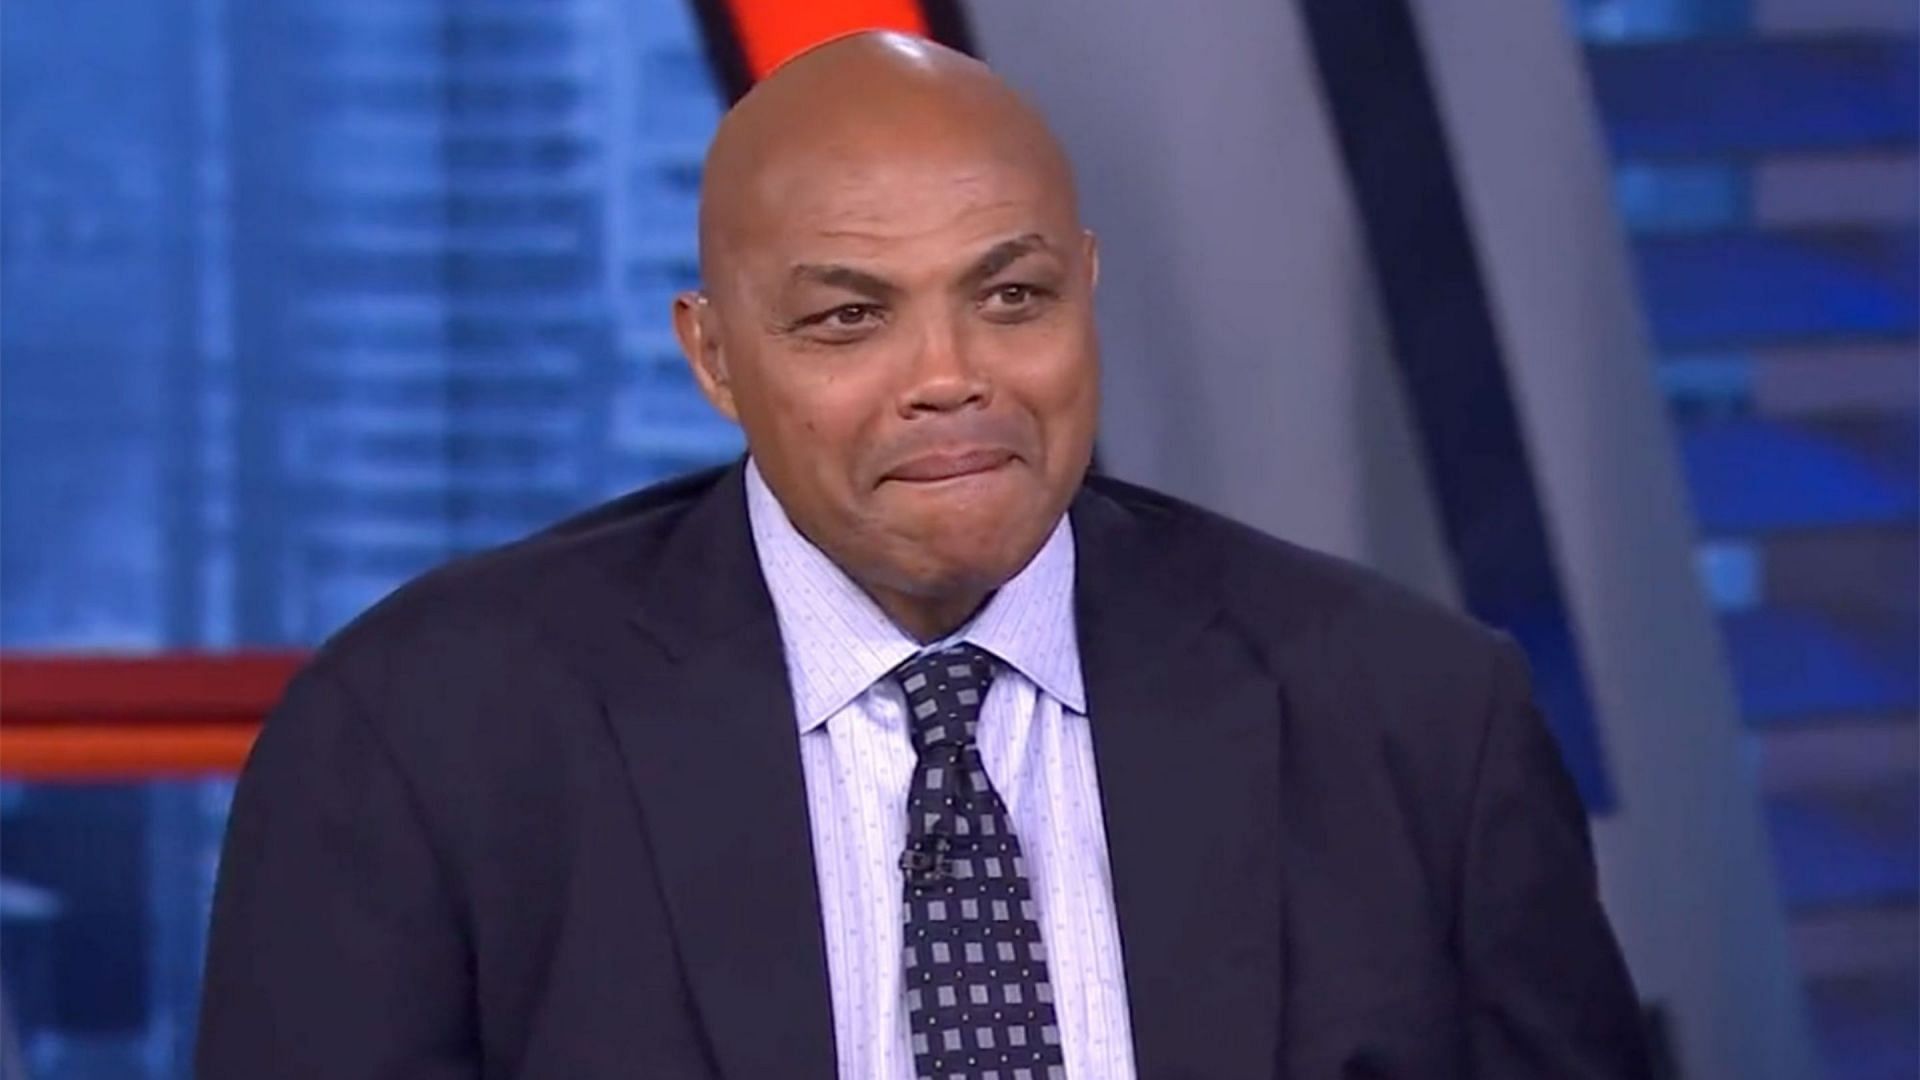 Charles Barkley on the set of Inside the NBA